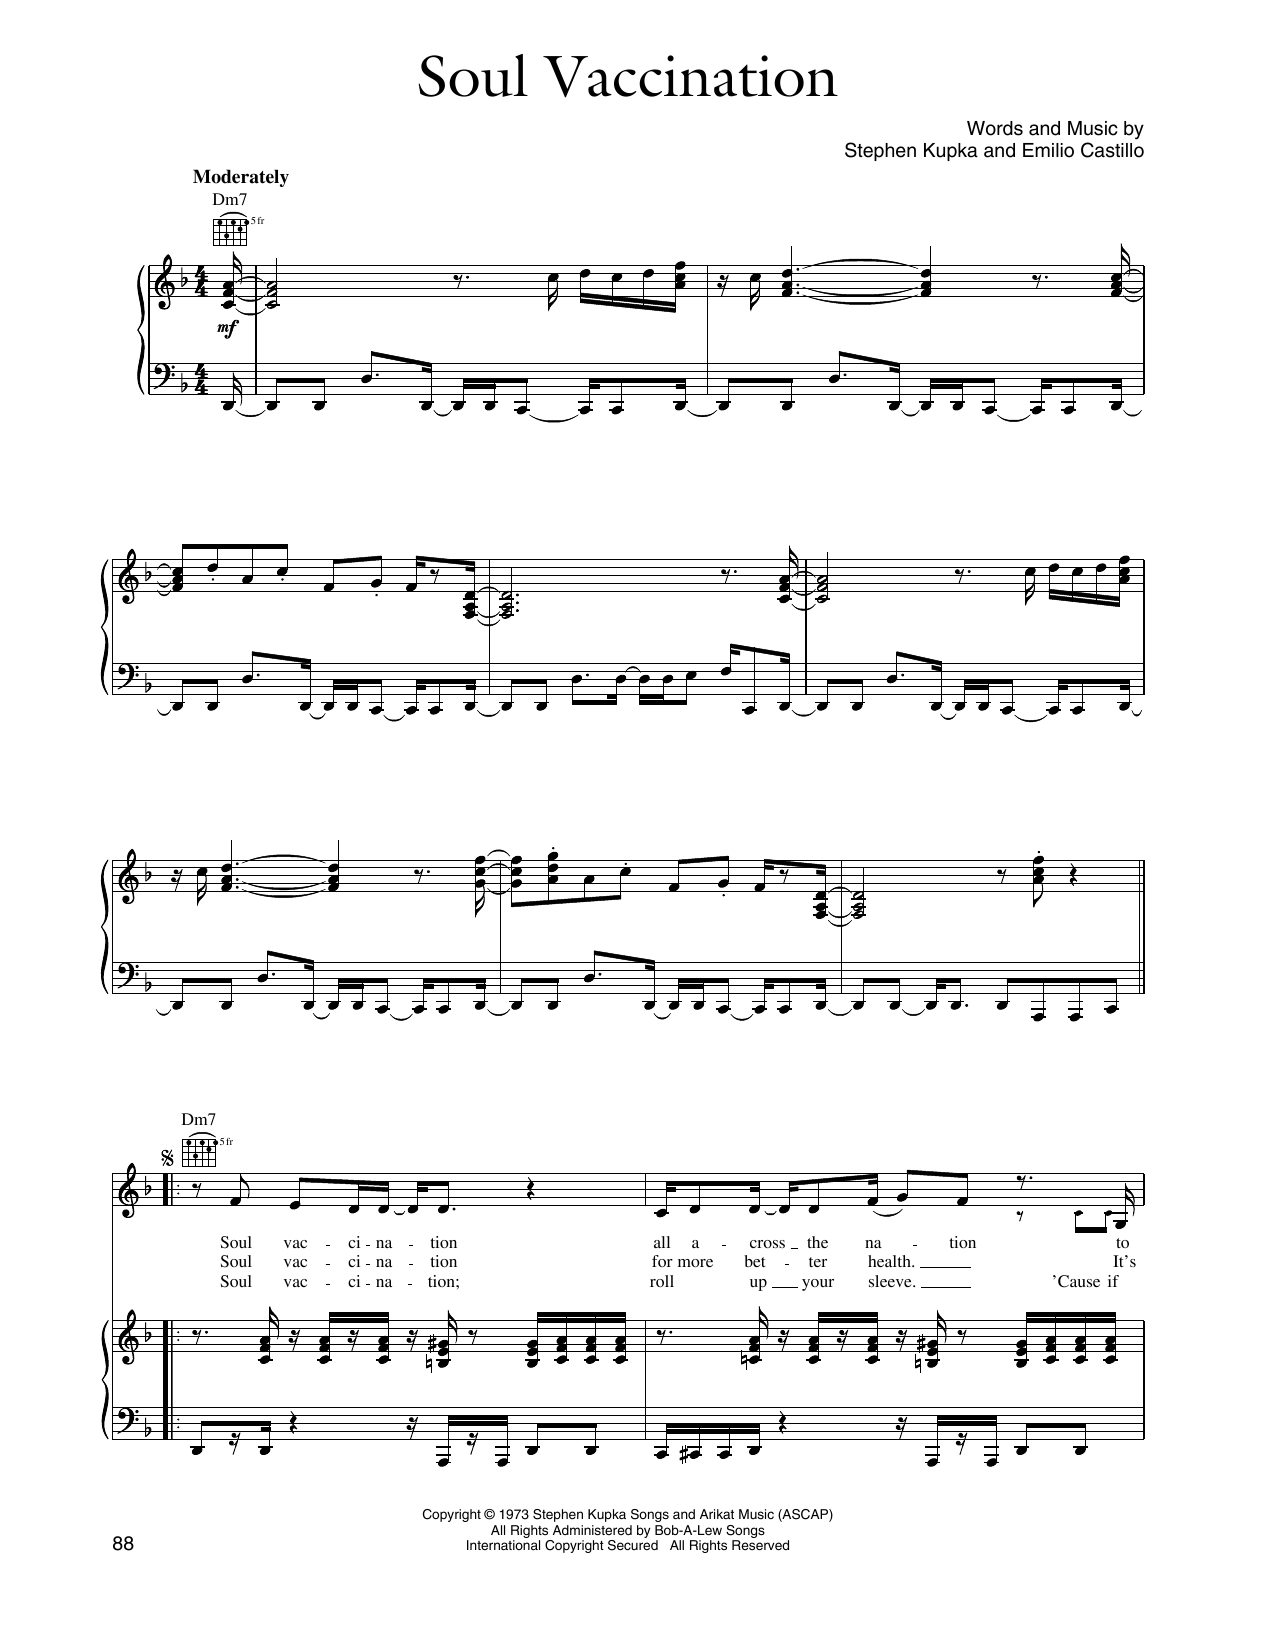 Tower Of Power Soul Vaccination sheet music notes printable PDF score